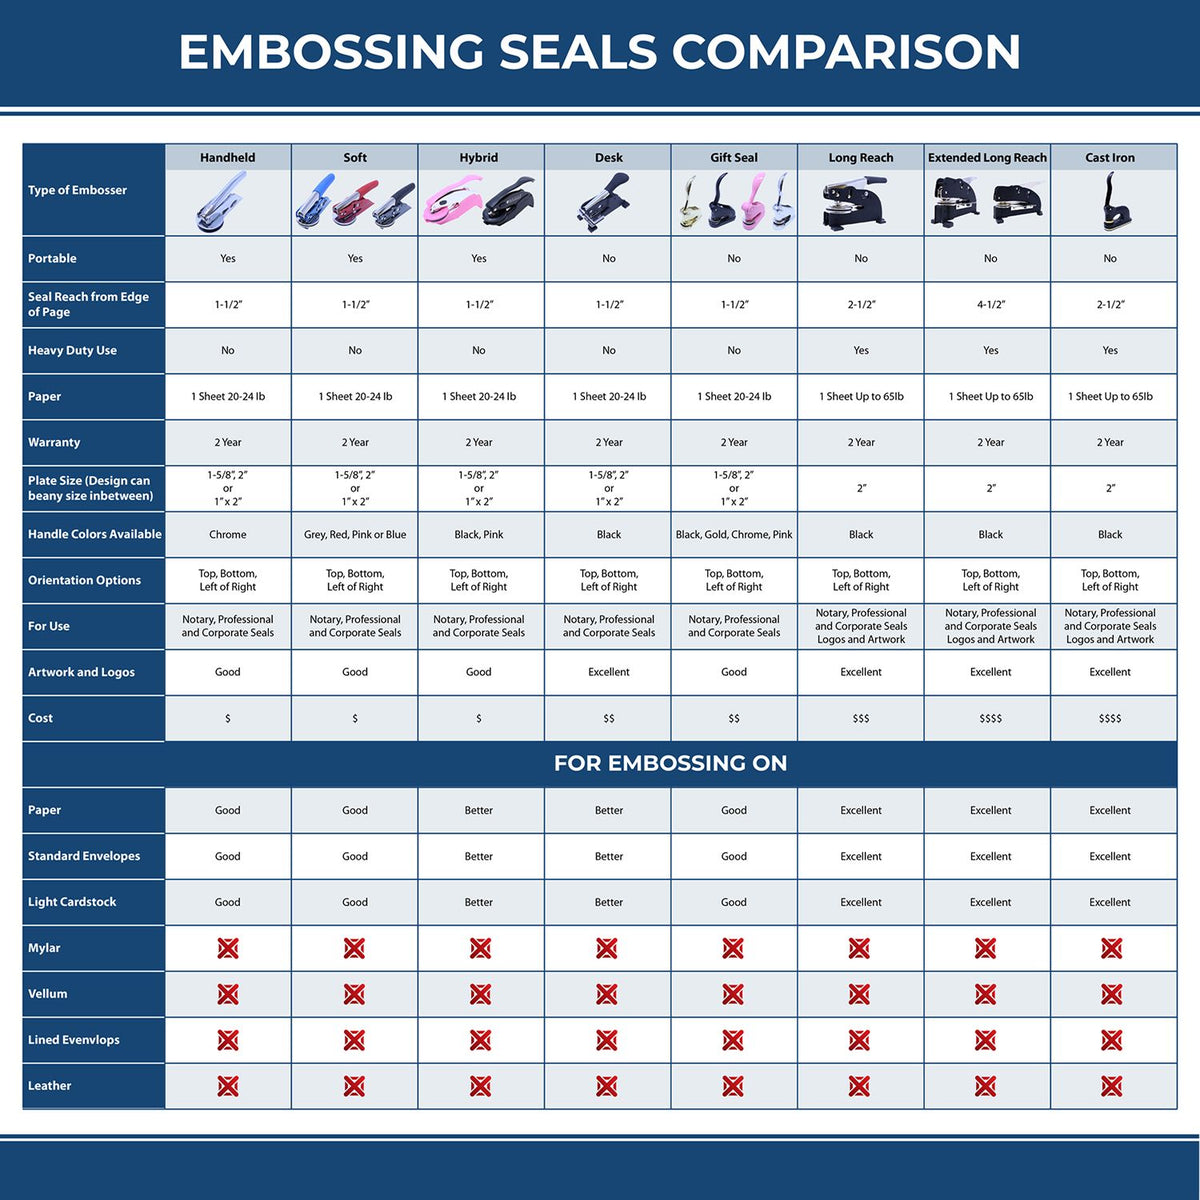 A comparison chart for the different types of mount models available for the Extended Long Reach Arizona Architect Seal Embosser.